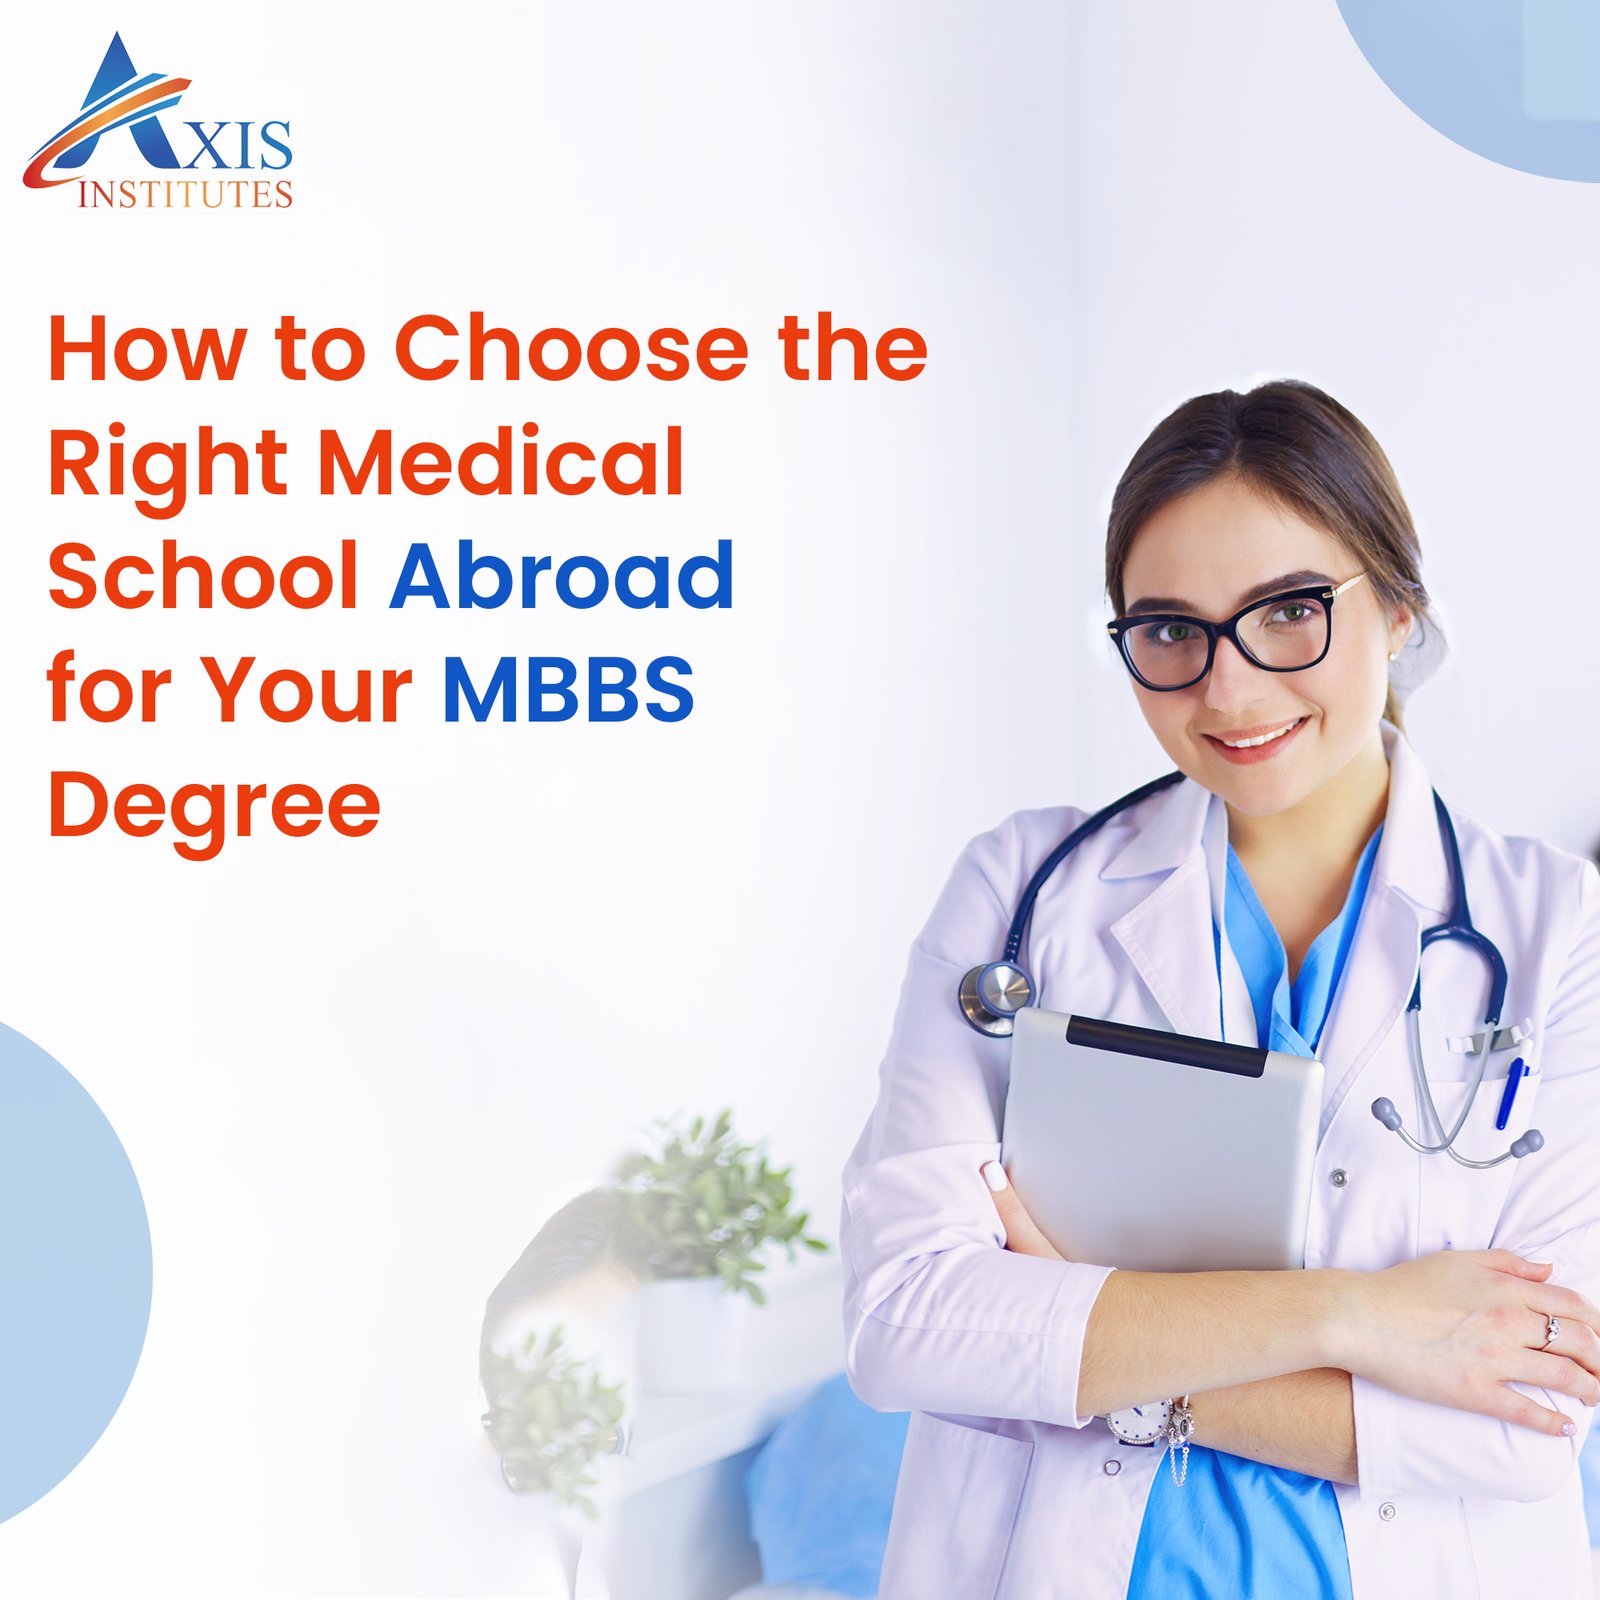 How to Choose the Right Medical School Abroad for Your MBBS Degree